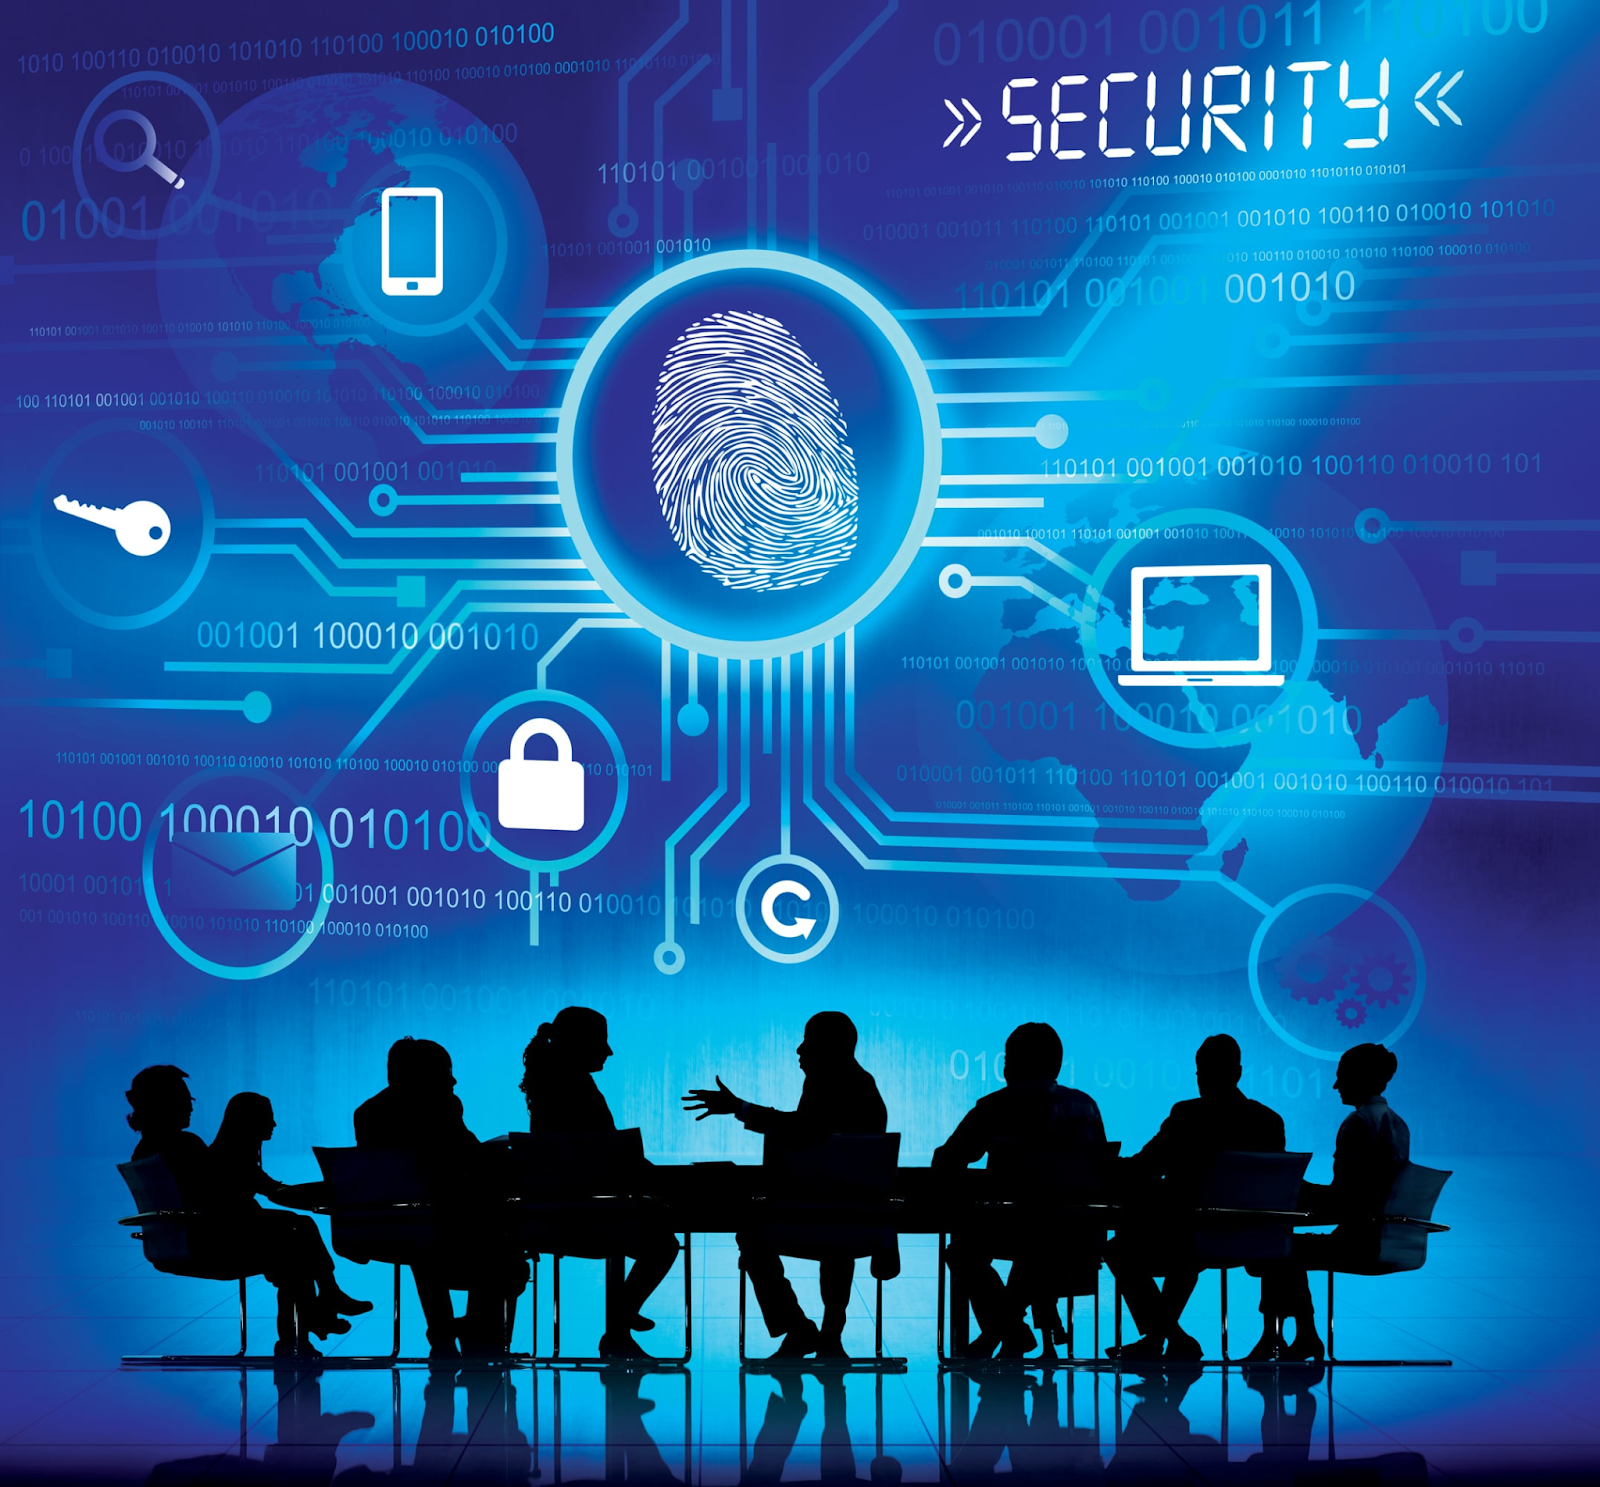 Best Practices for Board Members to Manage Cybersecurity Risks